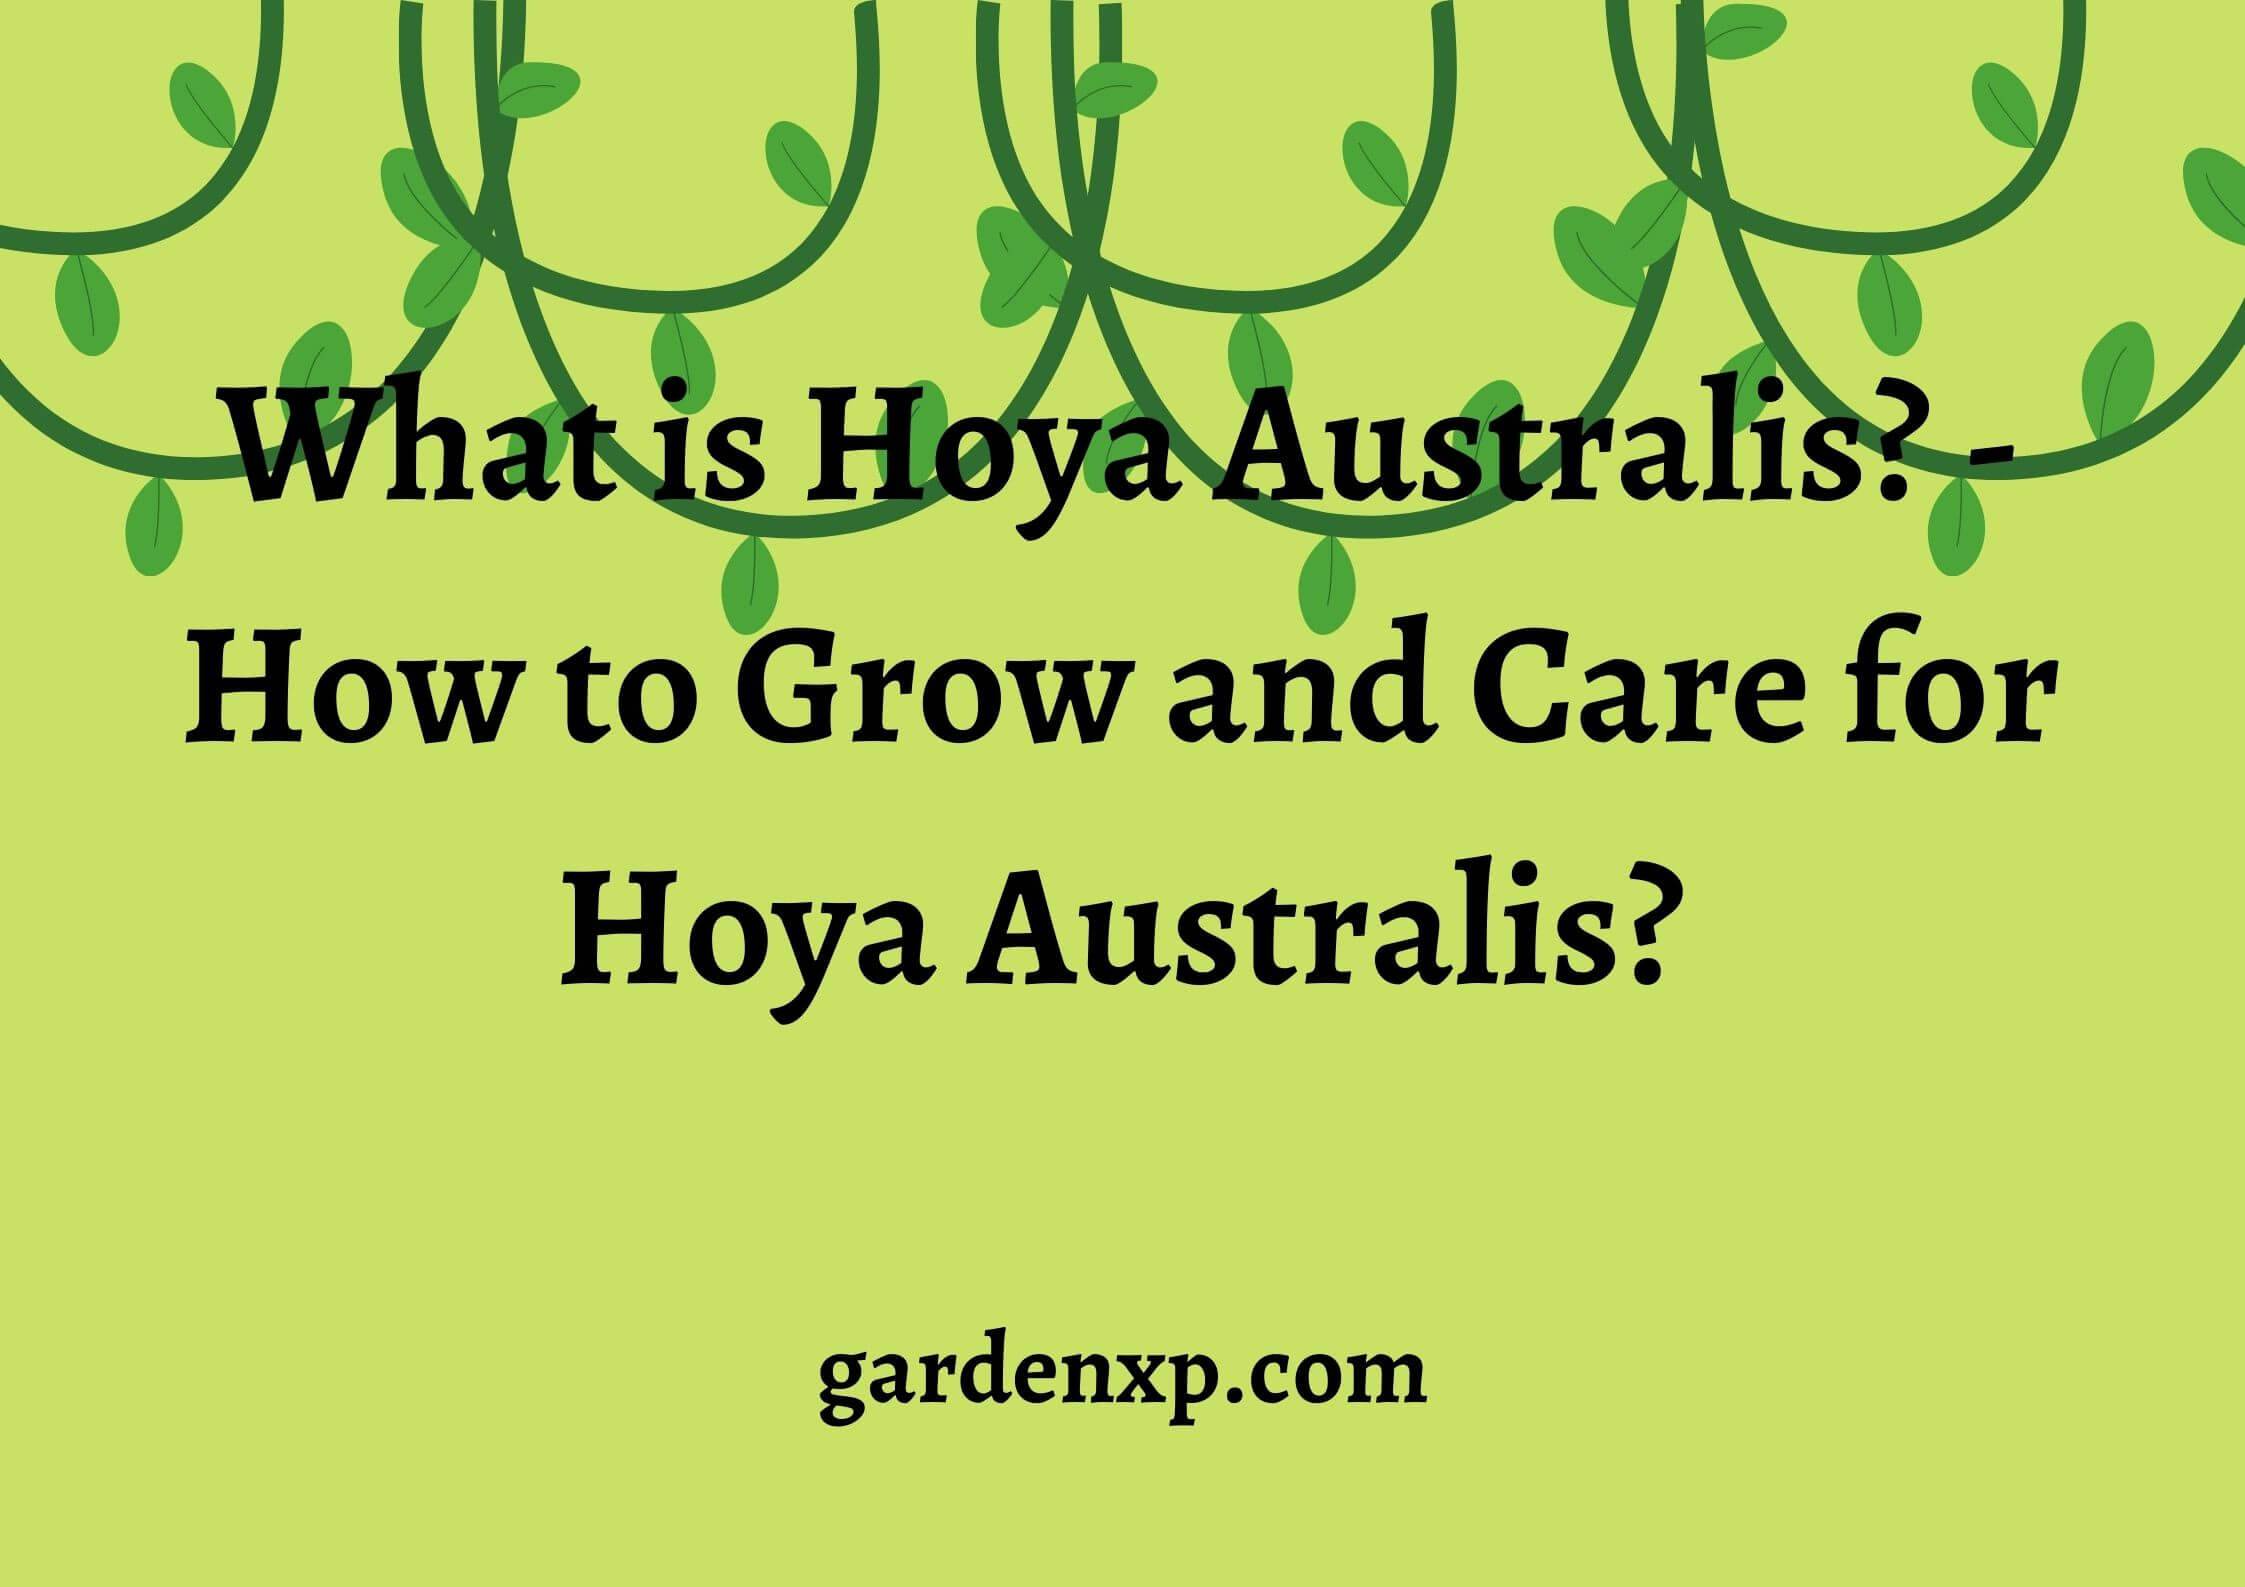 What is Hoya Australis? - How to Grow and Care for Hoya Australis?